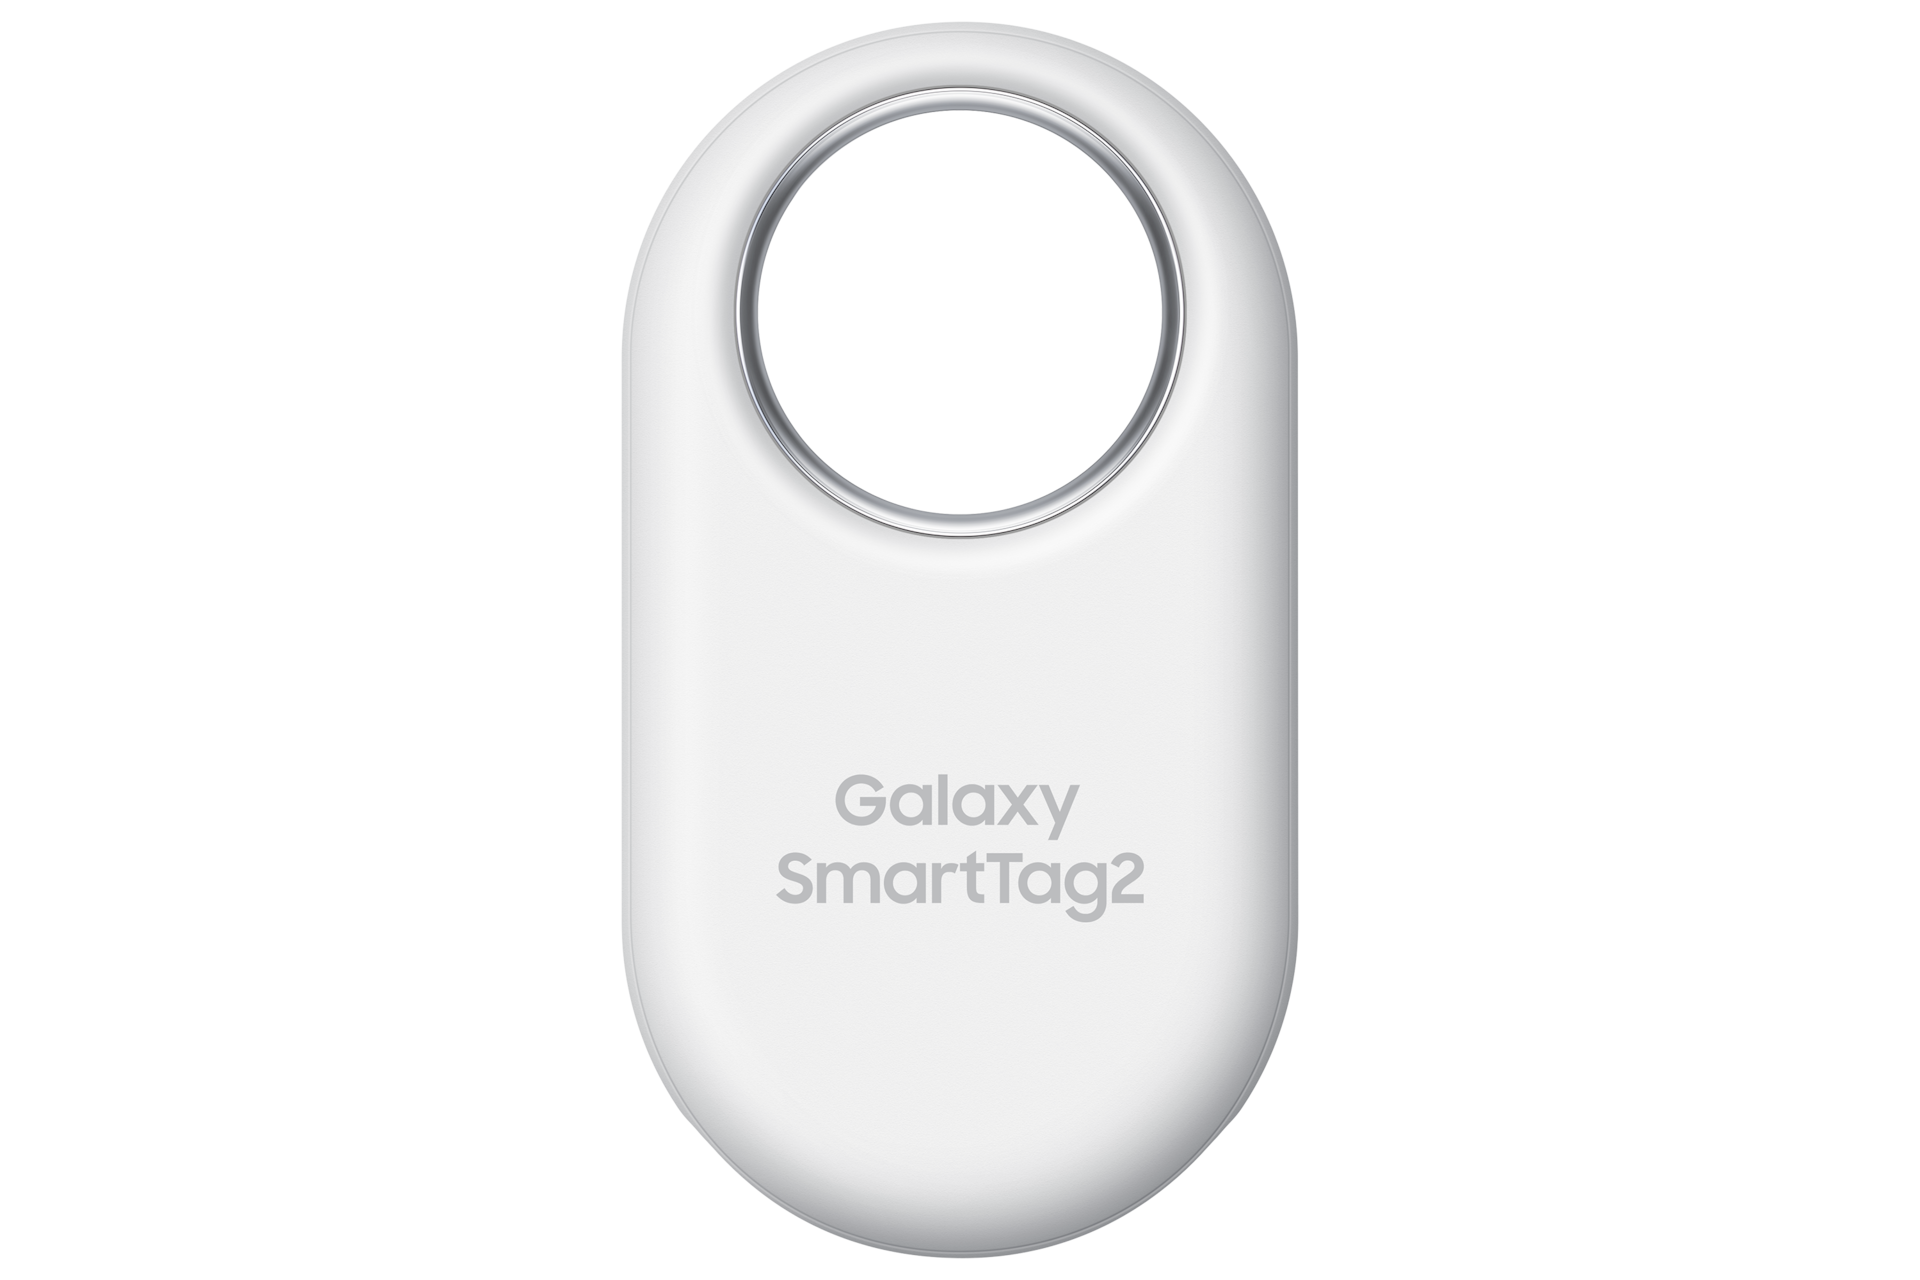 Samsung Galaxy SmartTag 2 Design Emerges Online; Check out the Details!